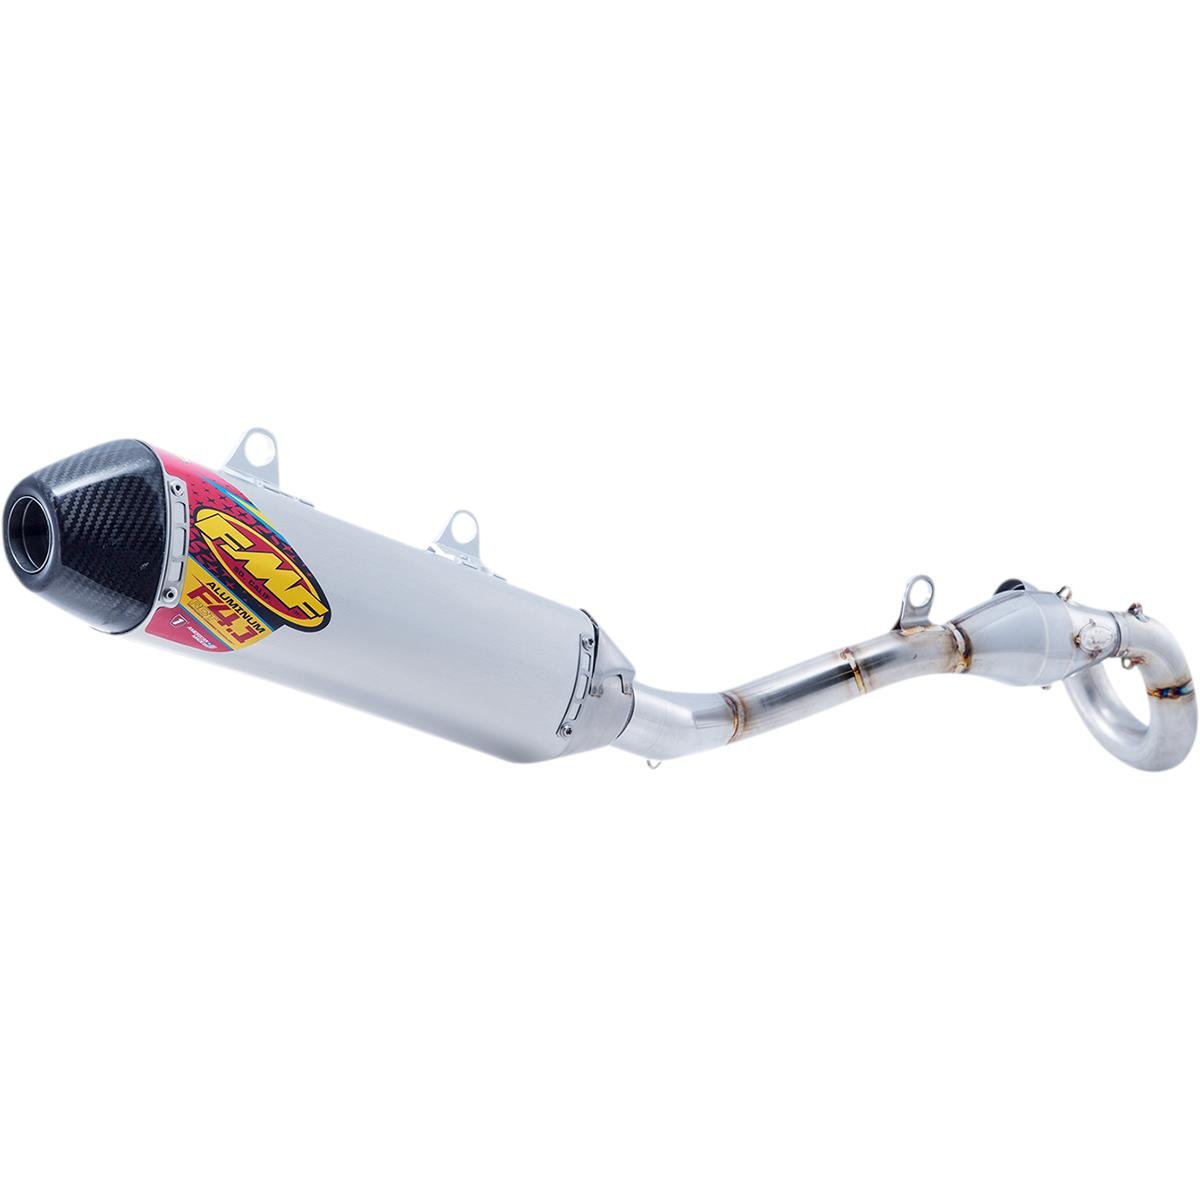 FMF Ligne complète 4.1 RCT Stainless Kawasaki KX 250F 21-